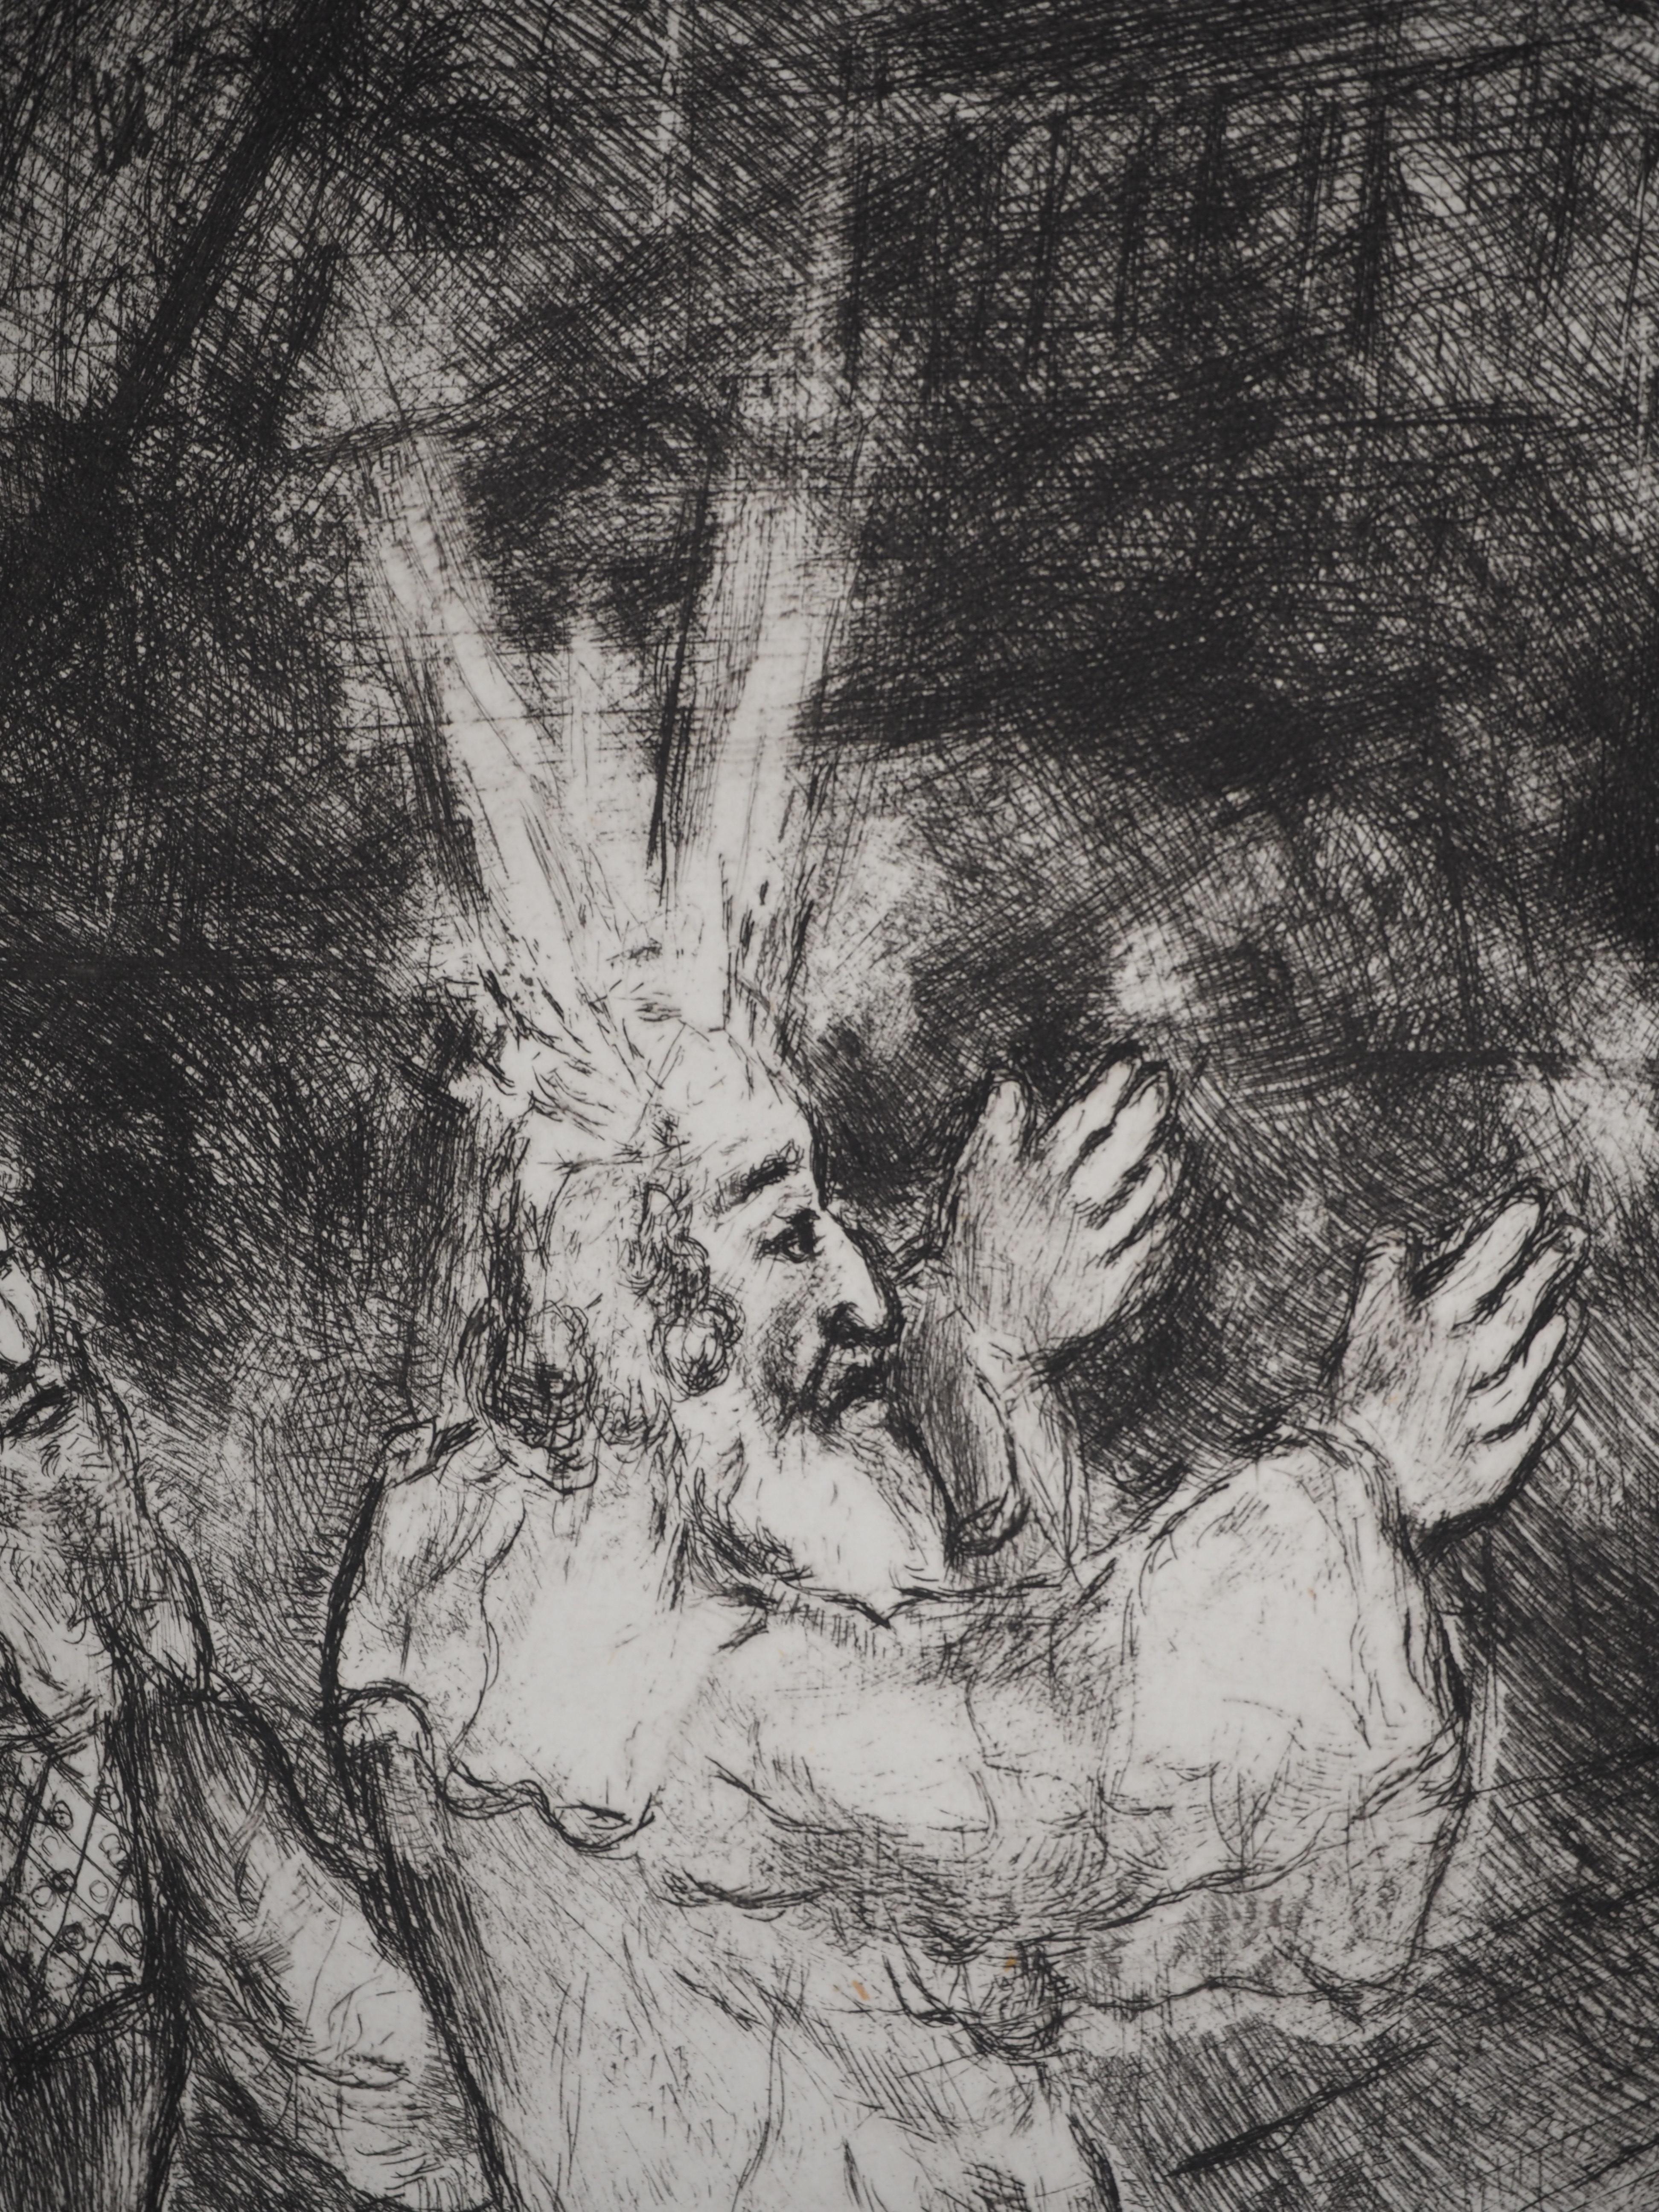 Marc Chagall (1887-1958)
Bible : Moses and Aaron with Pharaoh (Moïse et Aaron devant Pharaon), 1939

Original etching
Not signed
On Montval vellum, 44 x 33.5 cm (c. 17.3 x 13.1 inch)

INFORMATION: Published by Vollard / Tériade in 1956

REFERENCE: